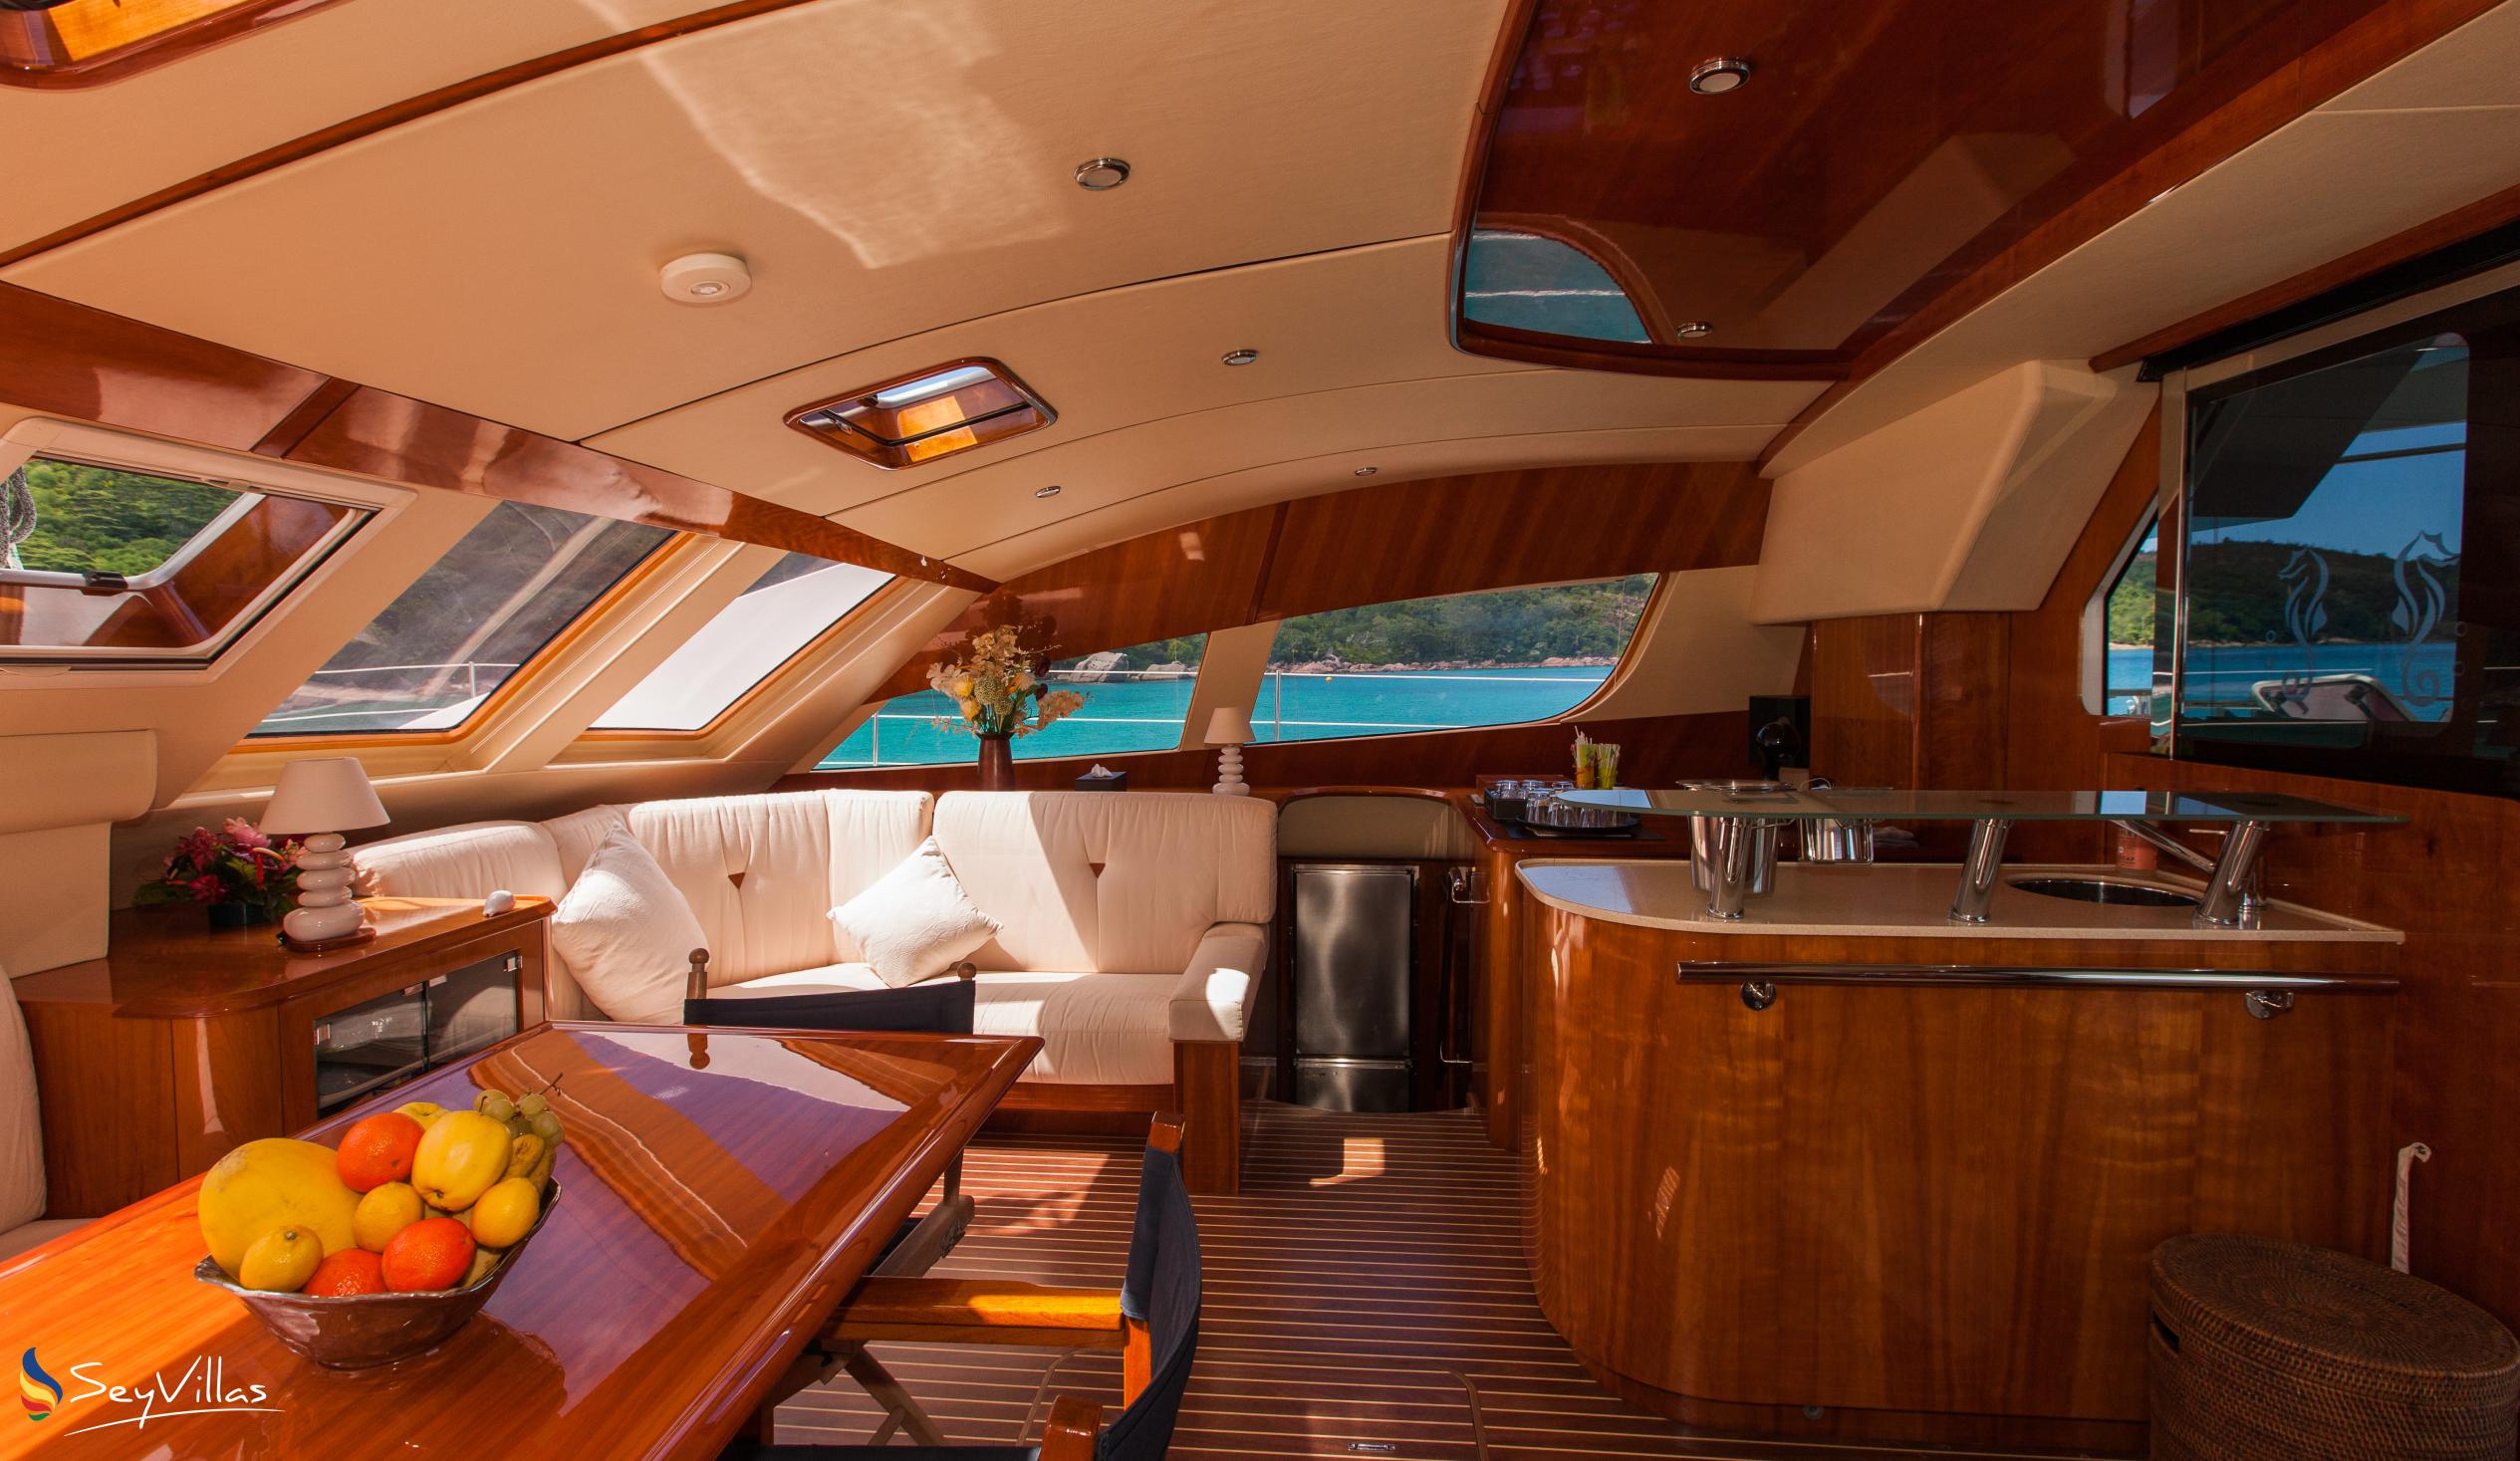 Foto 78: Seyscapes Yacht Charter - Charter completo Cirrus - Seychelles (Seychelles)